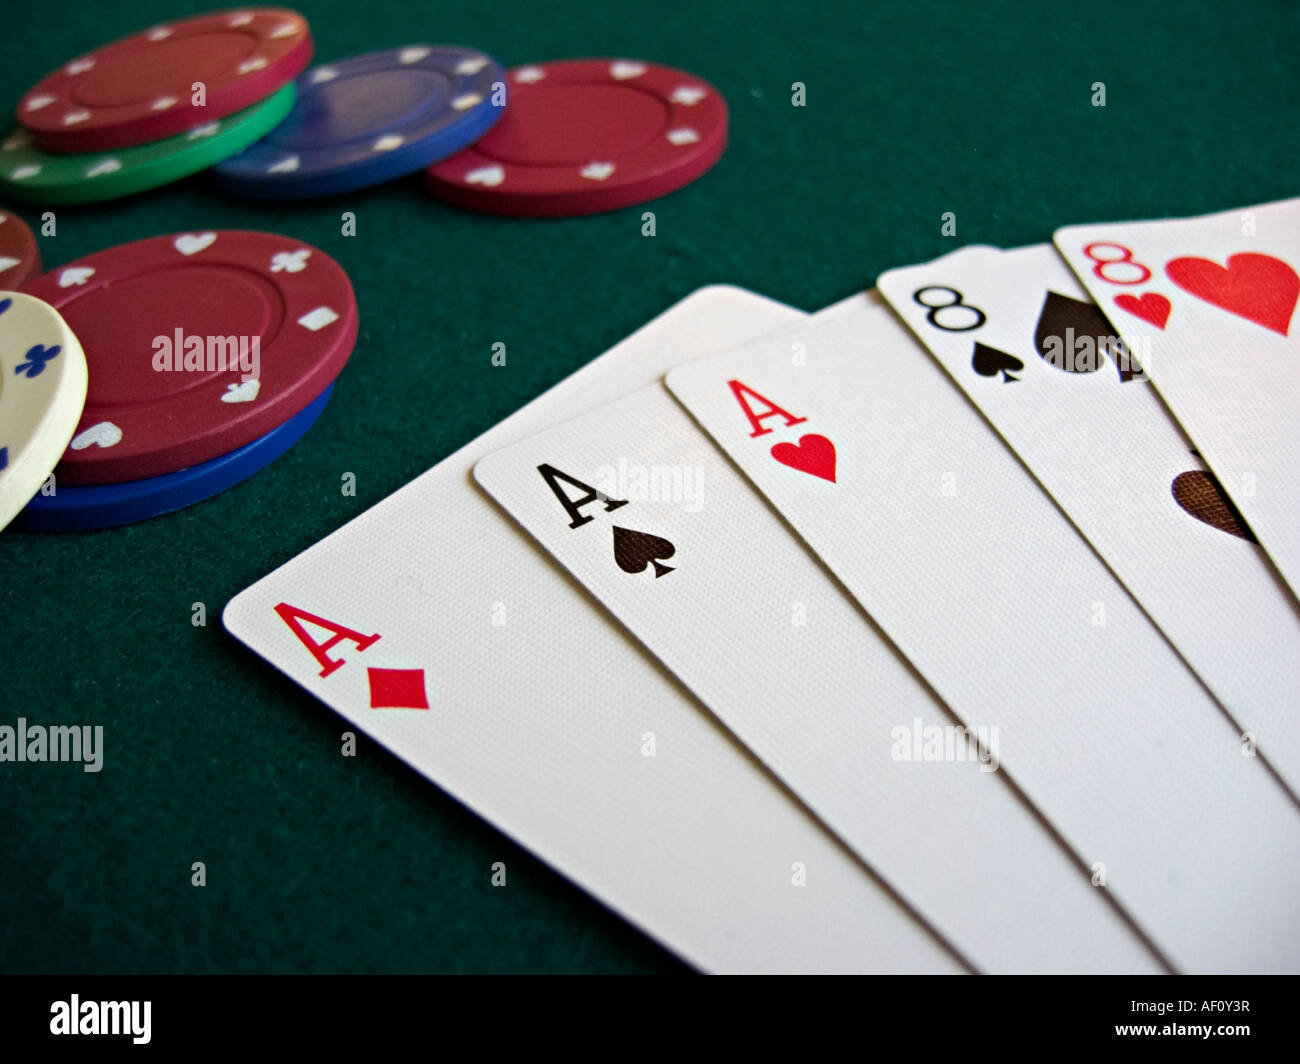 Poker hand, Full House, Aces over Eights with the cards fanned out on a green felt tabletop that also contains a few poker chips Stock Photo